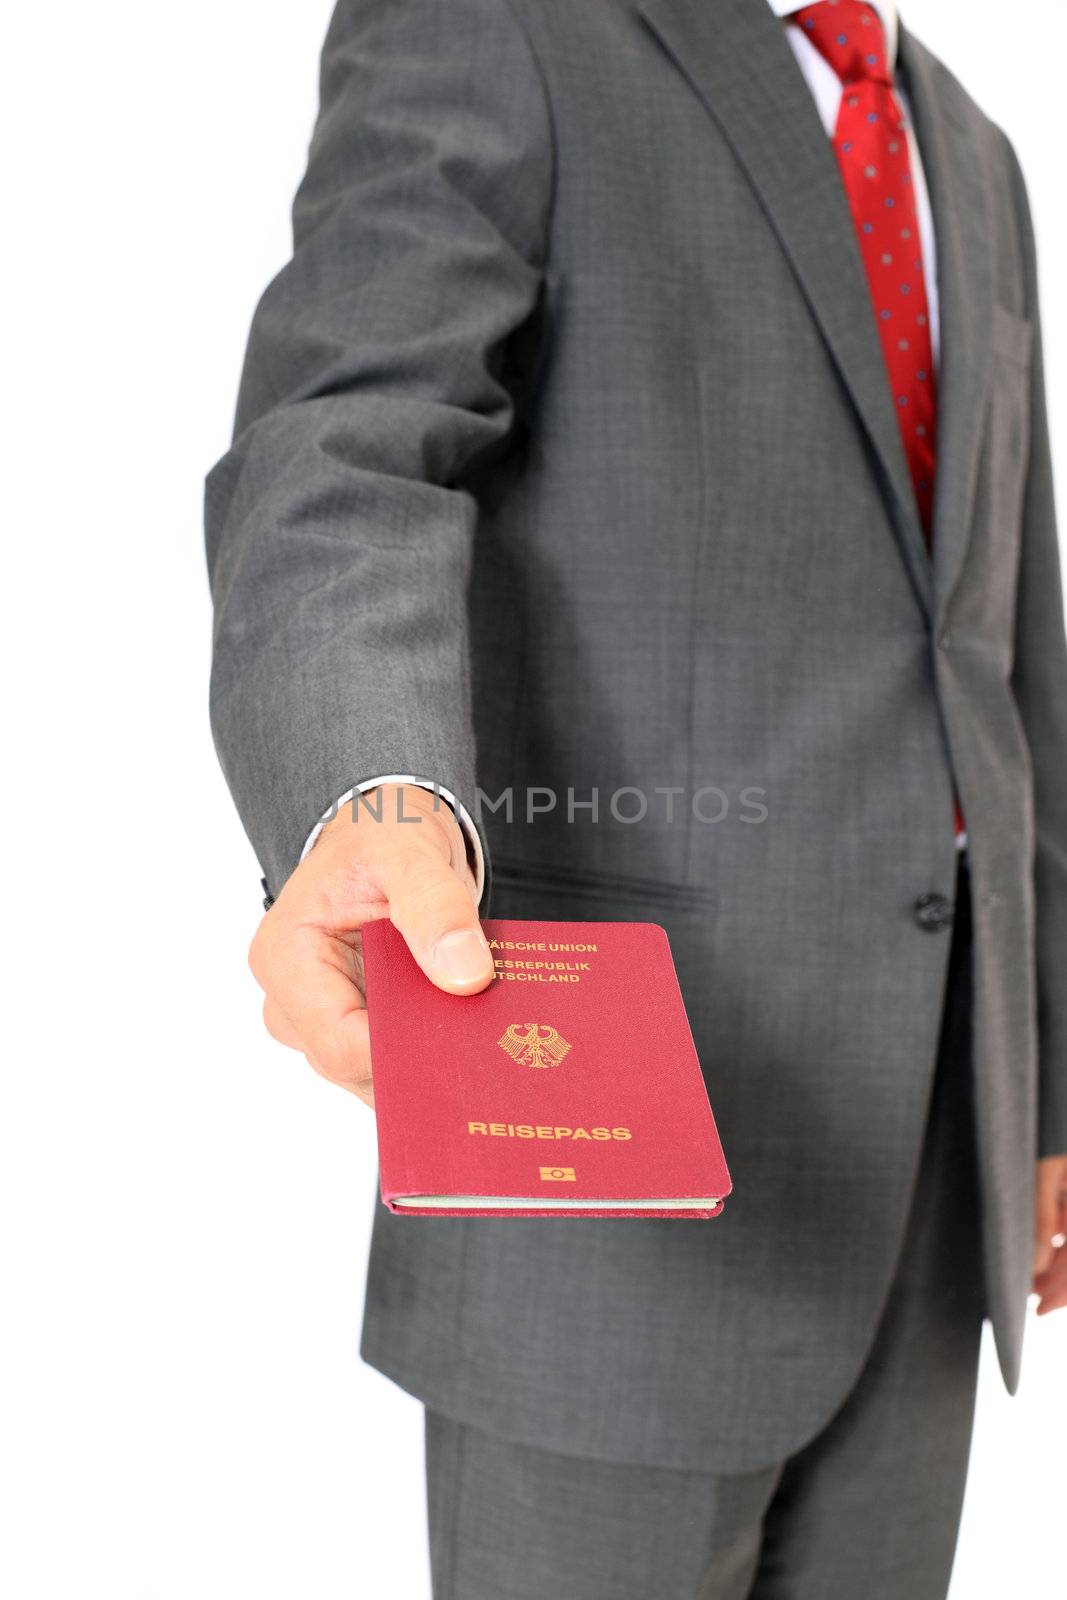 Businessman showing his german passport. All on white background.